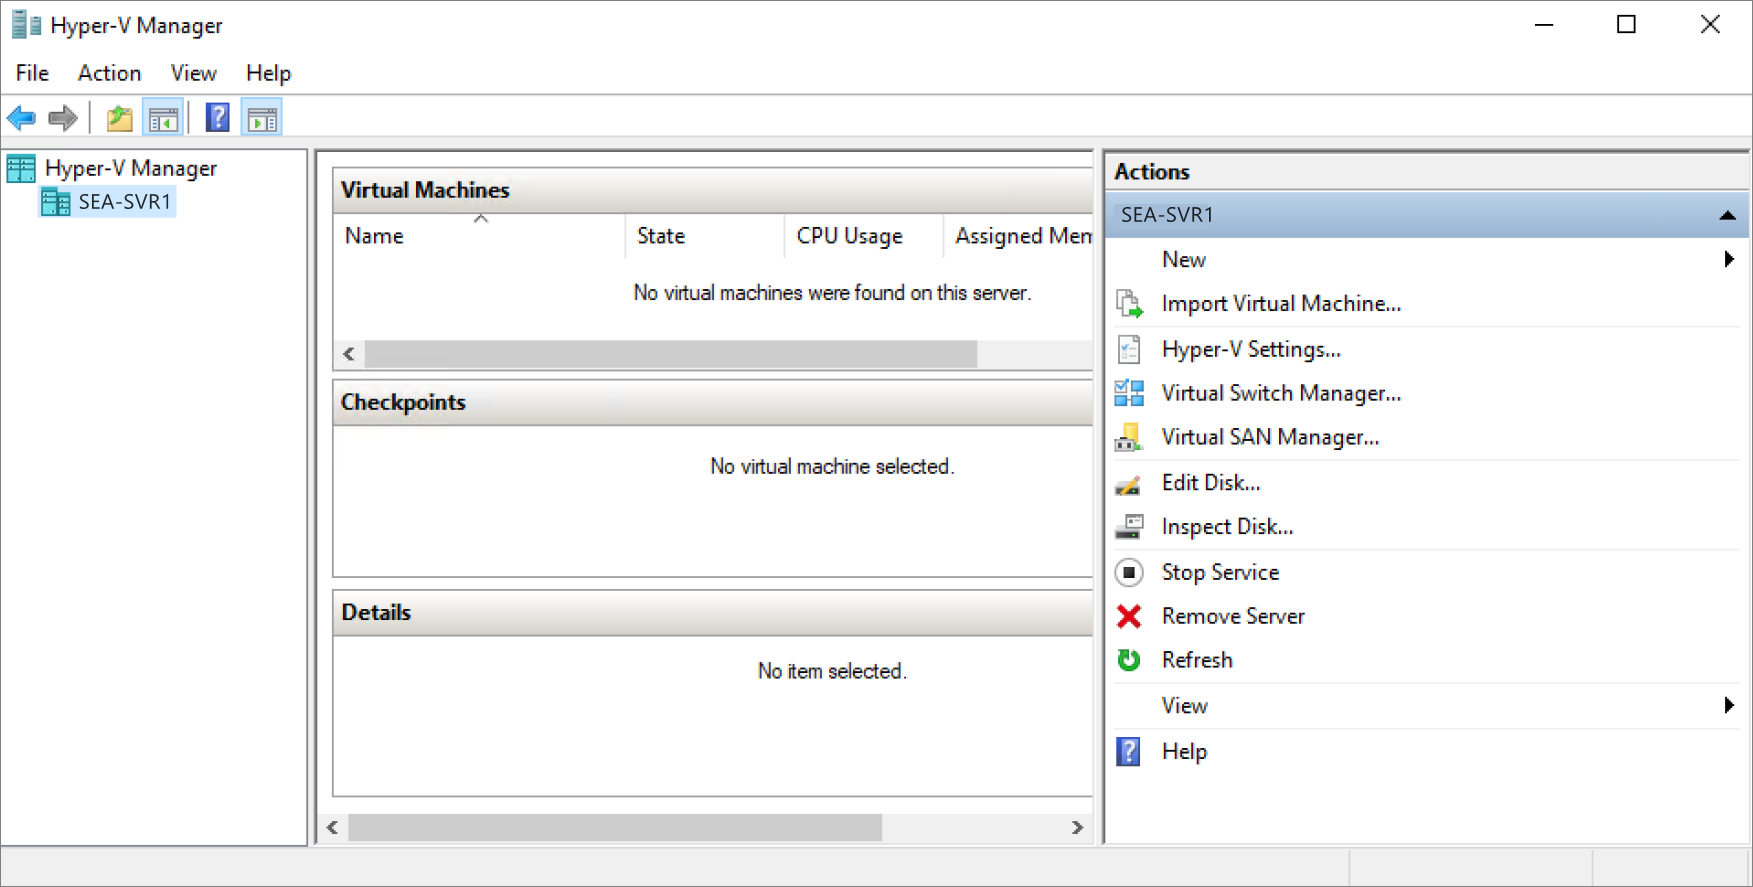 The Hyper-V Manager GUI with its five panes: navigation, Virtual Machines, Checkpoints, Details, and Actions.